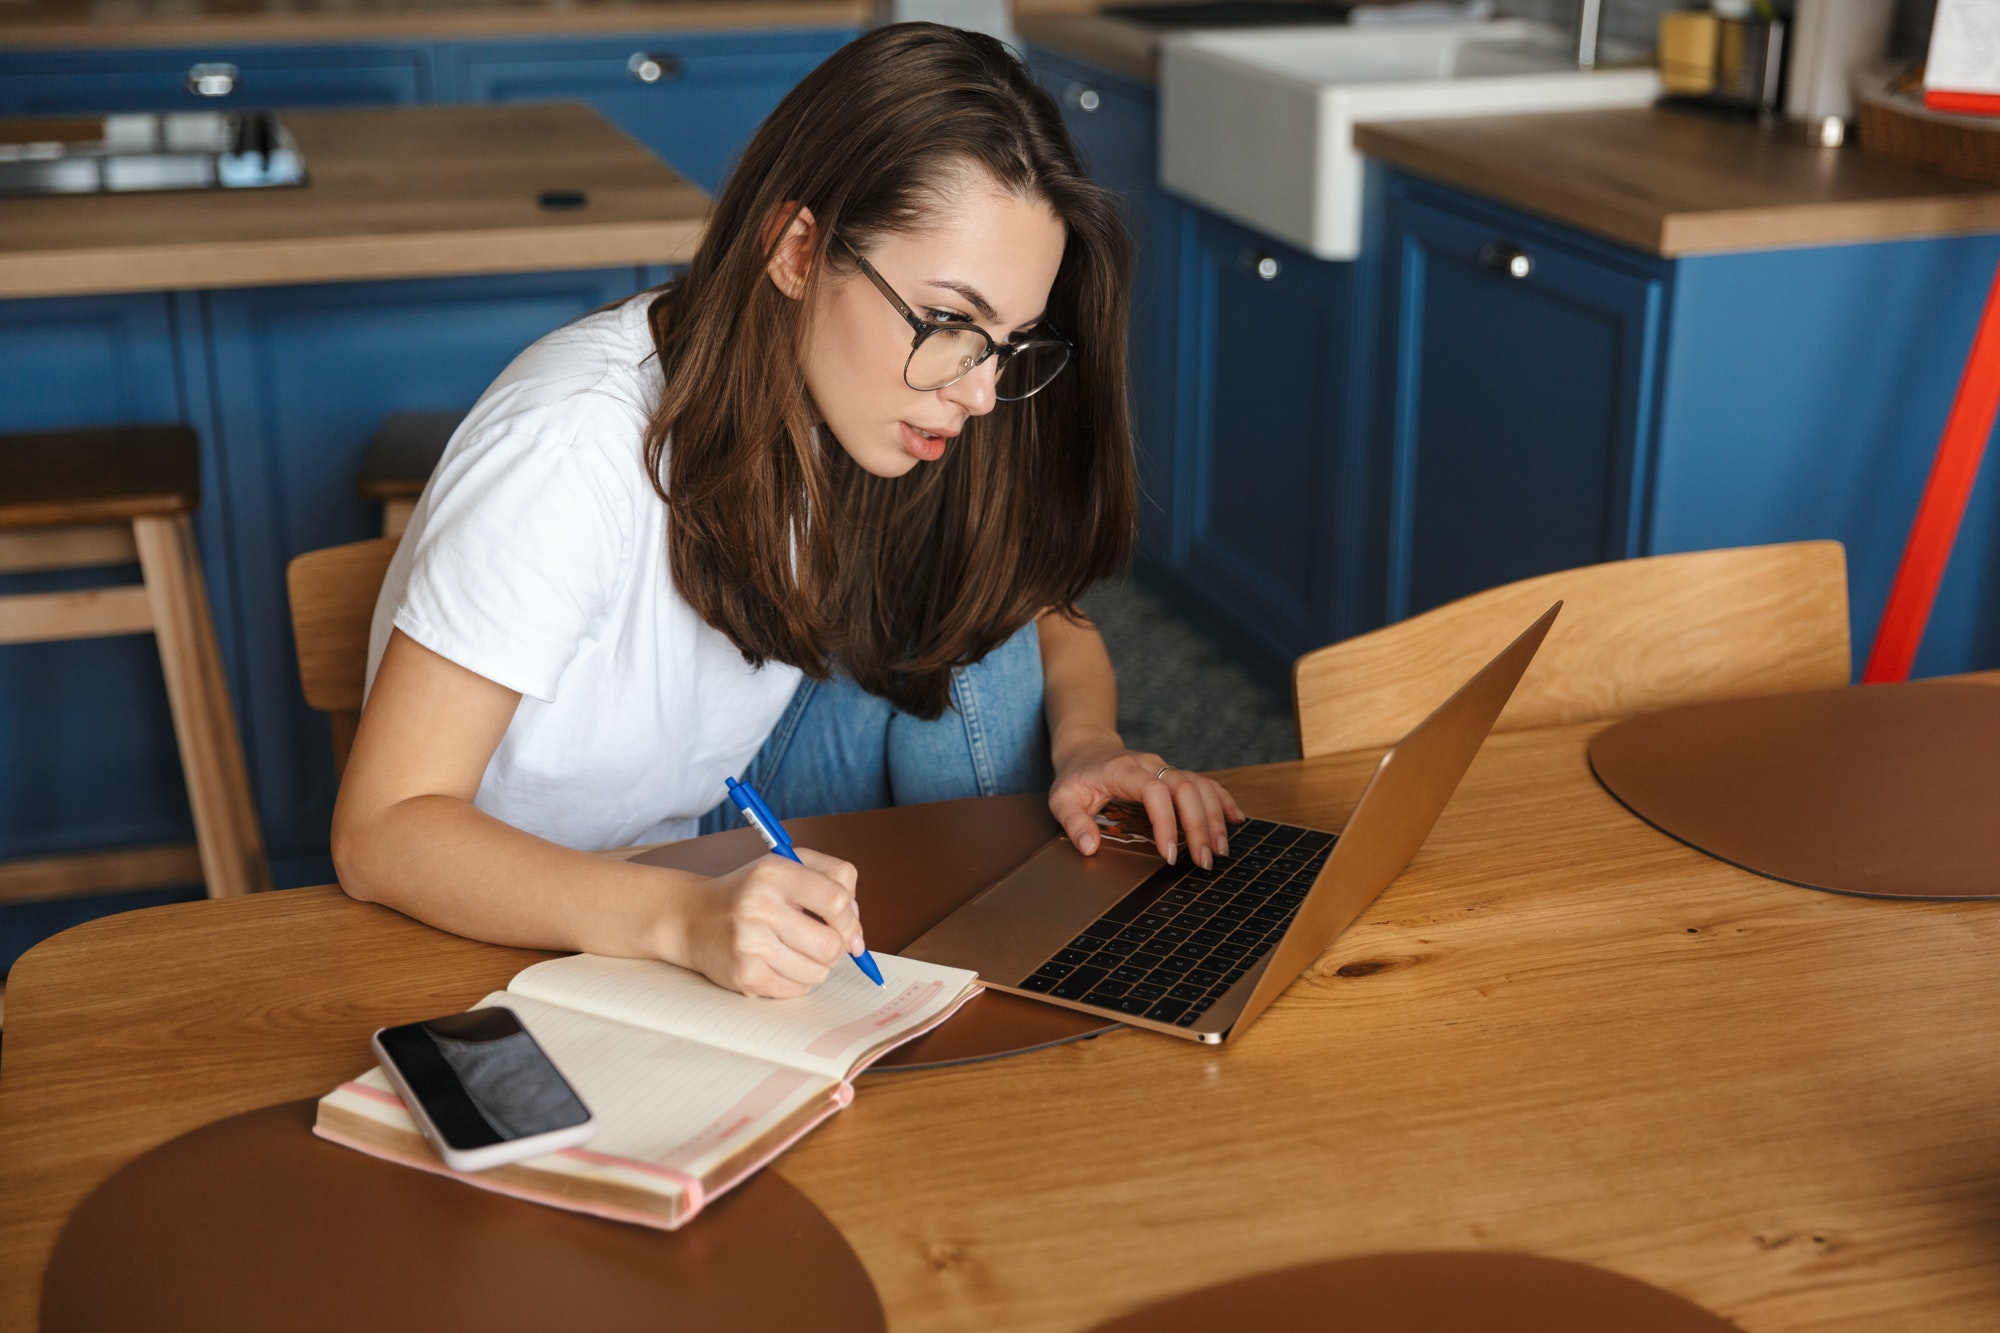 how to write a tagline: image of a woman working with laptop and writing